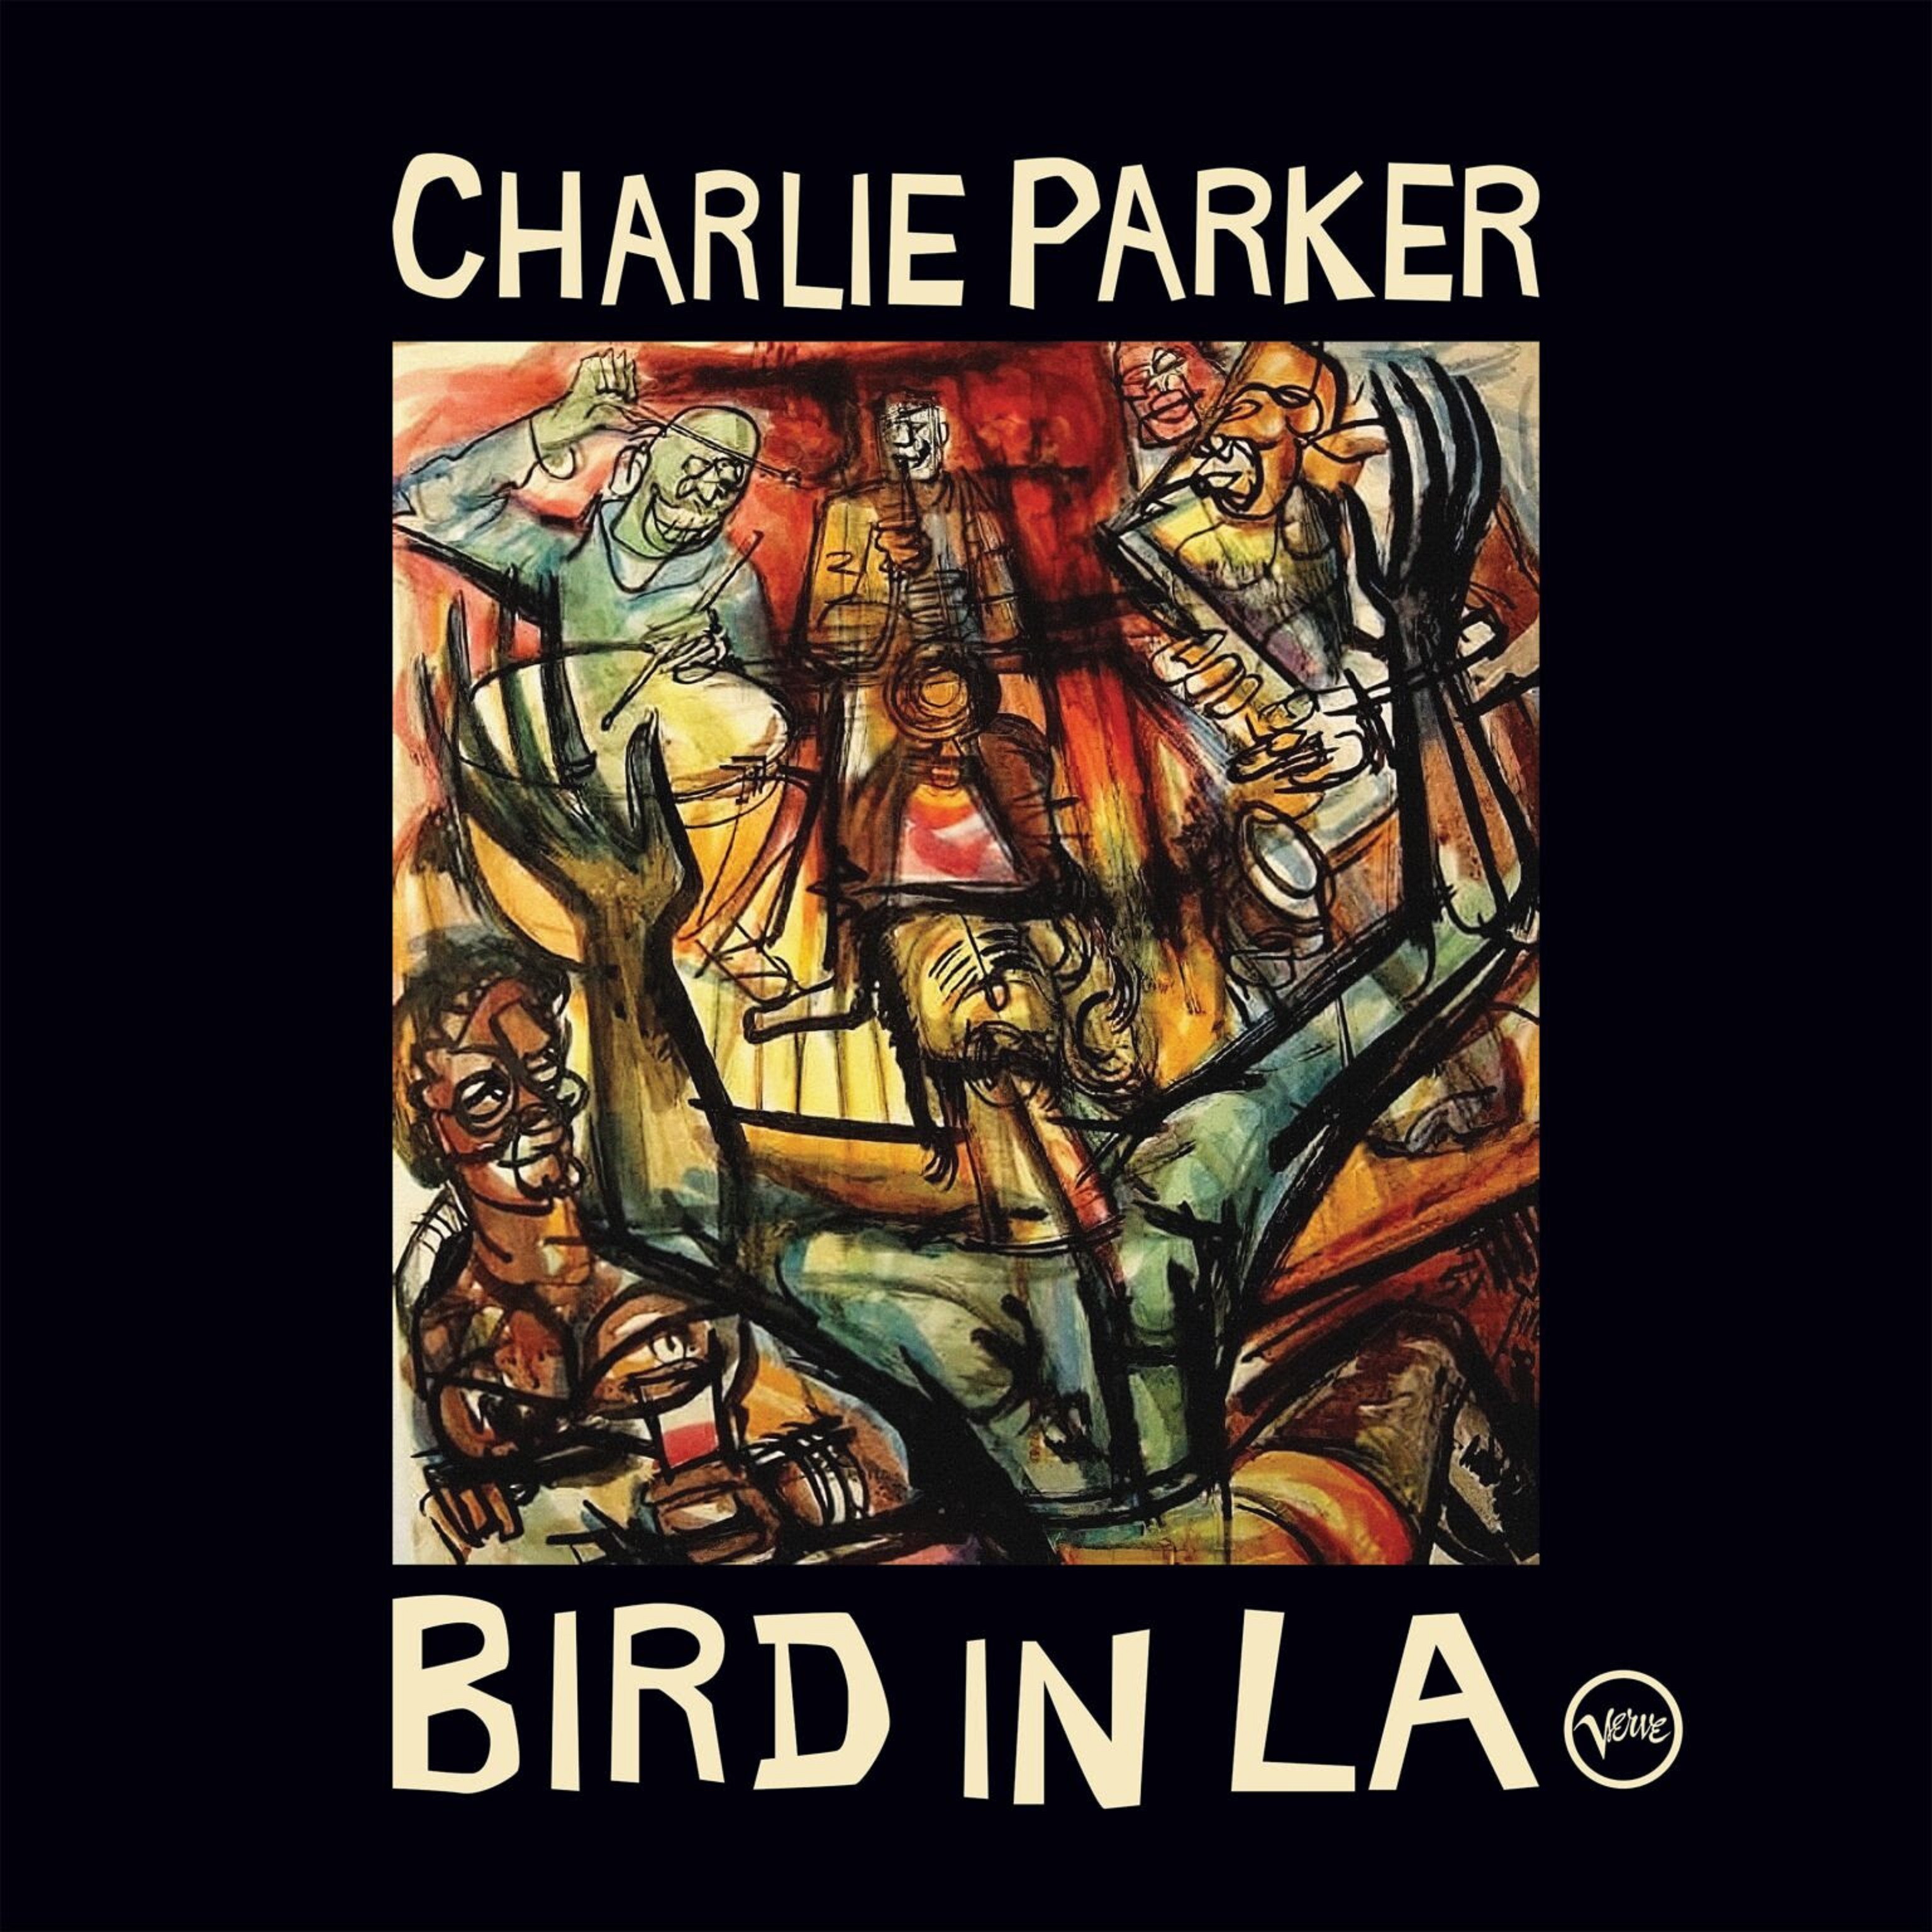 Unreleased And Rare Recordings From Charlie Parker's Fruitful Time In Los Angeles Released On New Collection "Bird In L.A."